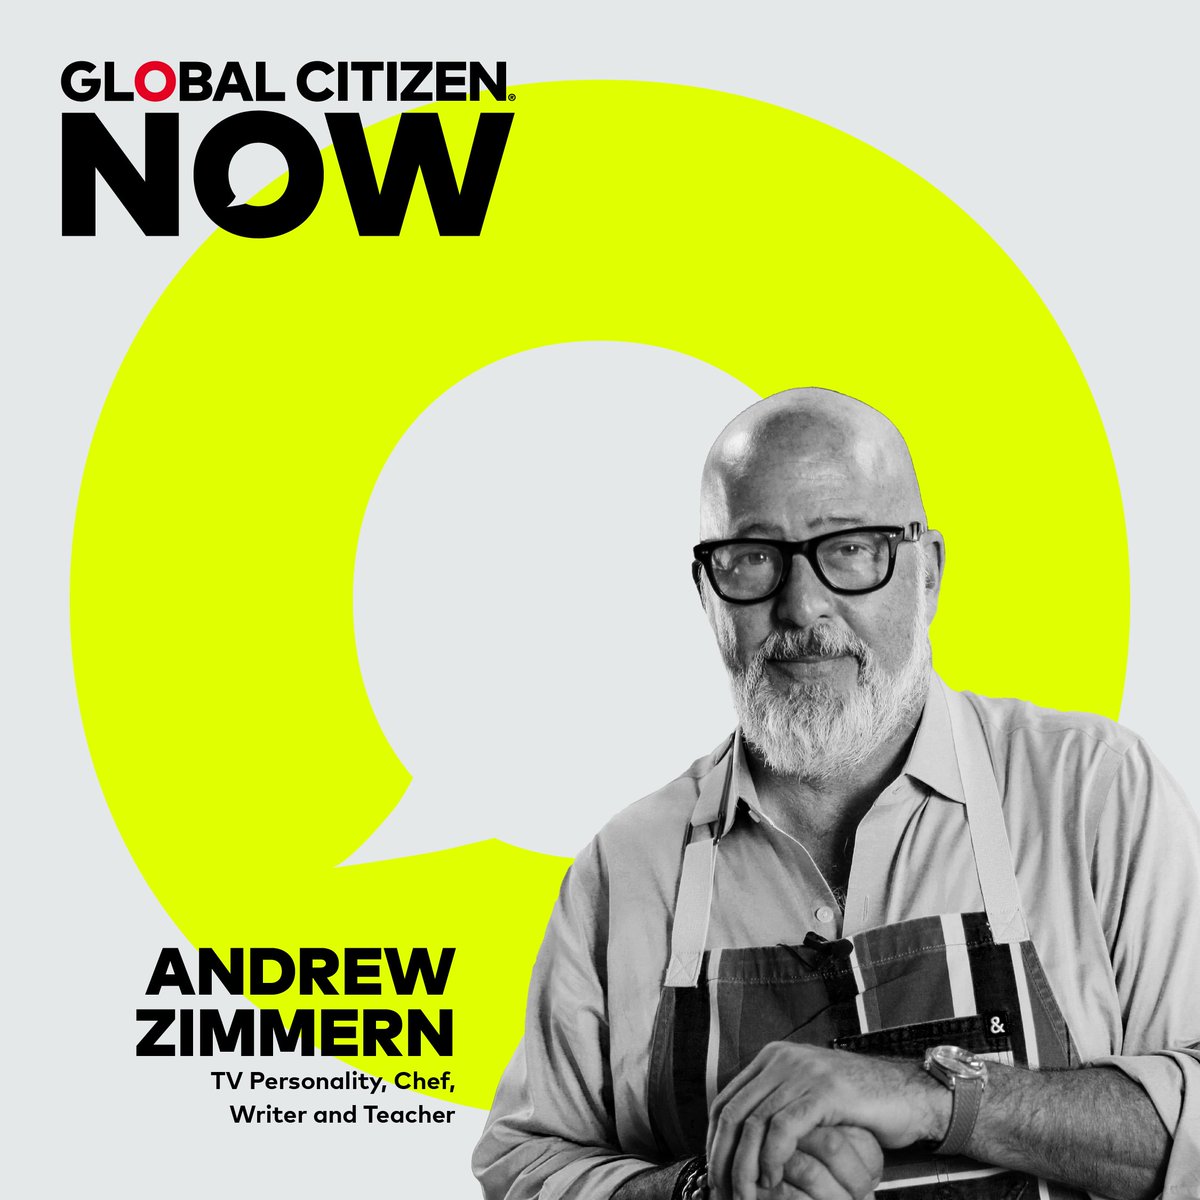 I’ll be at #GlobalCitizenNOW to join in conversation about how we can drive action to end extreme poverty, and YOU can join in too. Learn more about @GlblCtzn's action summit, and bookmark the website to watch on May 1-2: glblctzn.co/e/GC-NOW-24